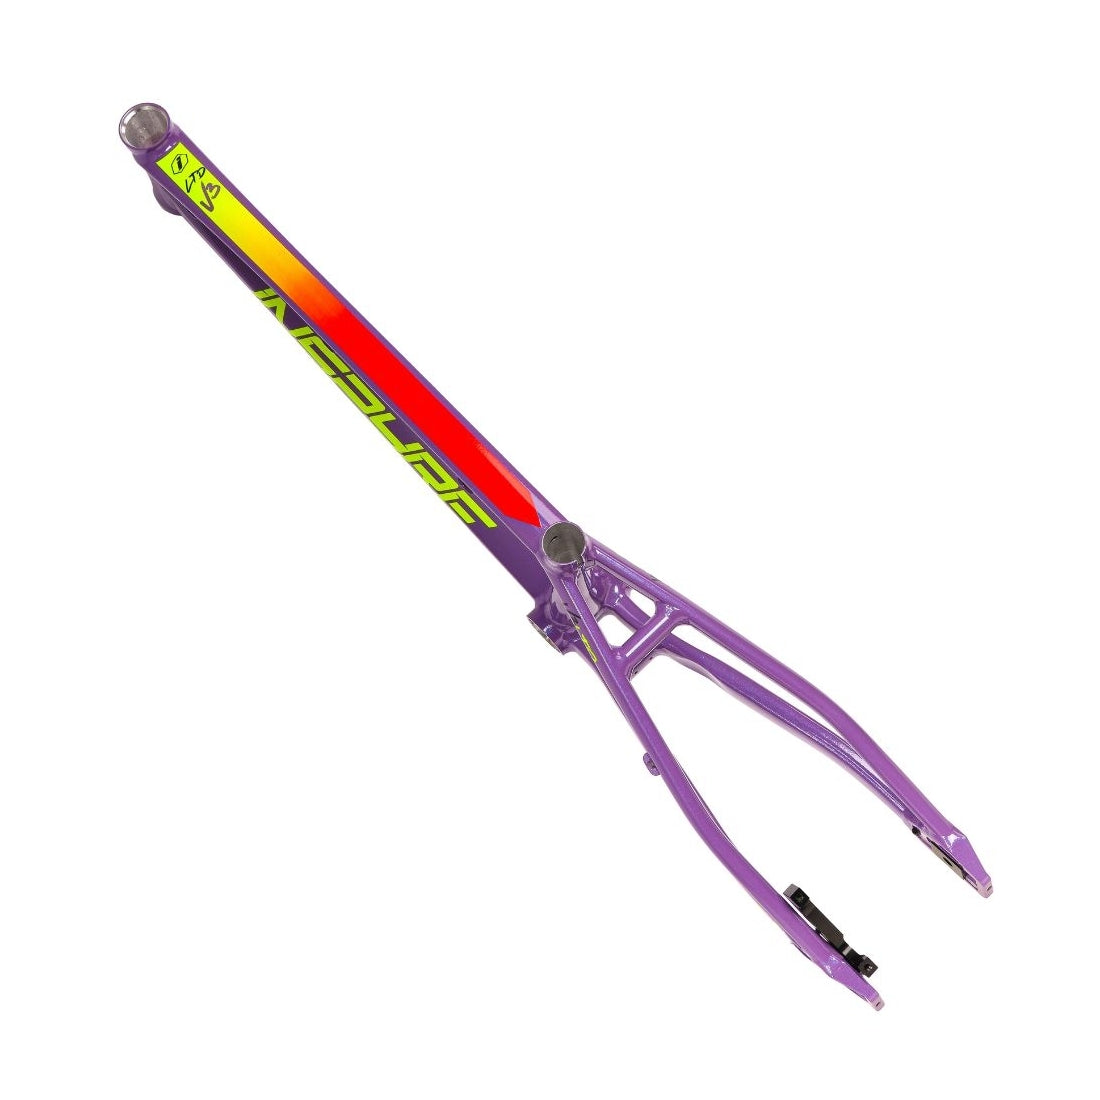 Colorful purple Inspyre Concorde V3 Expert Frame pogo stick isolated on a white background.